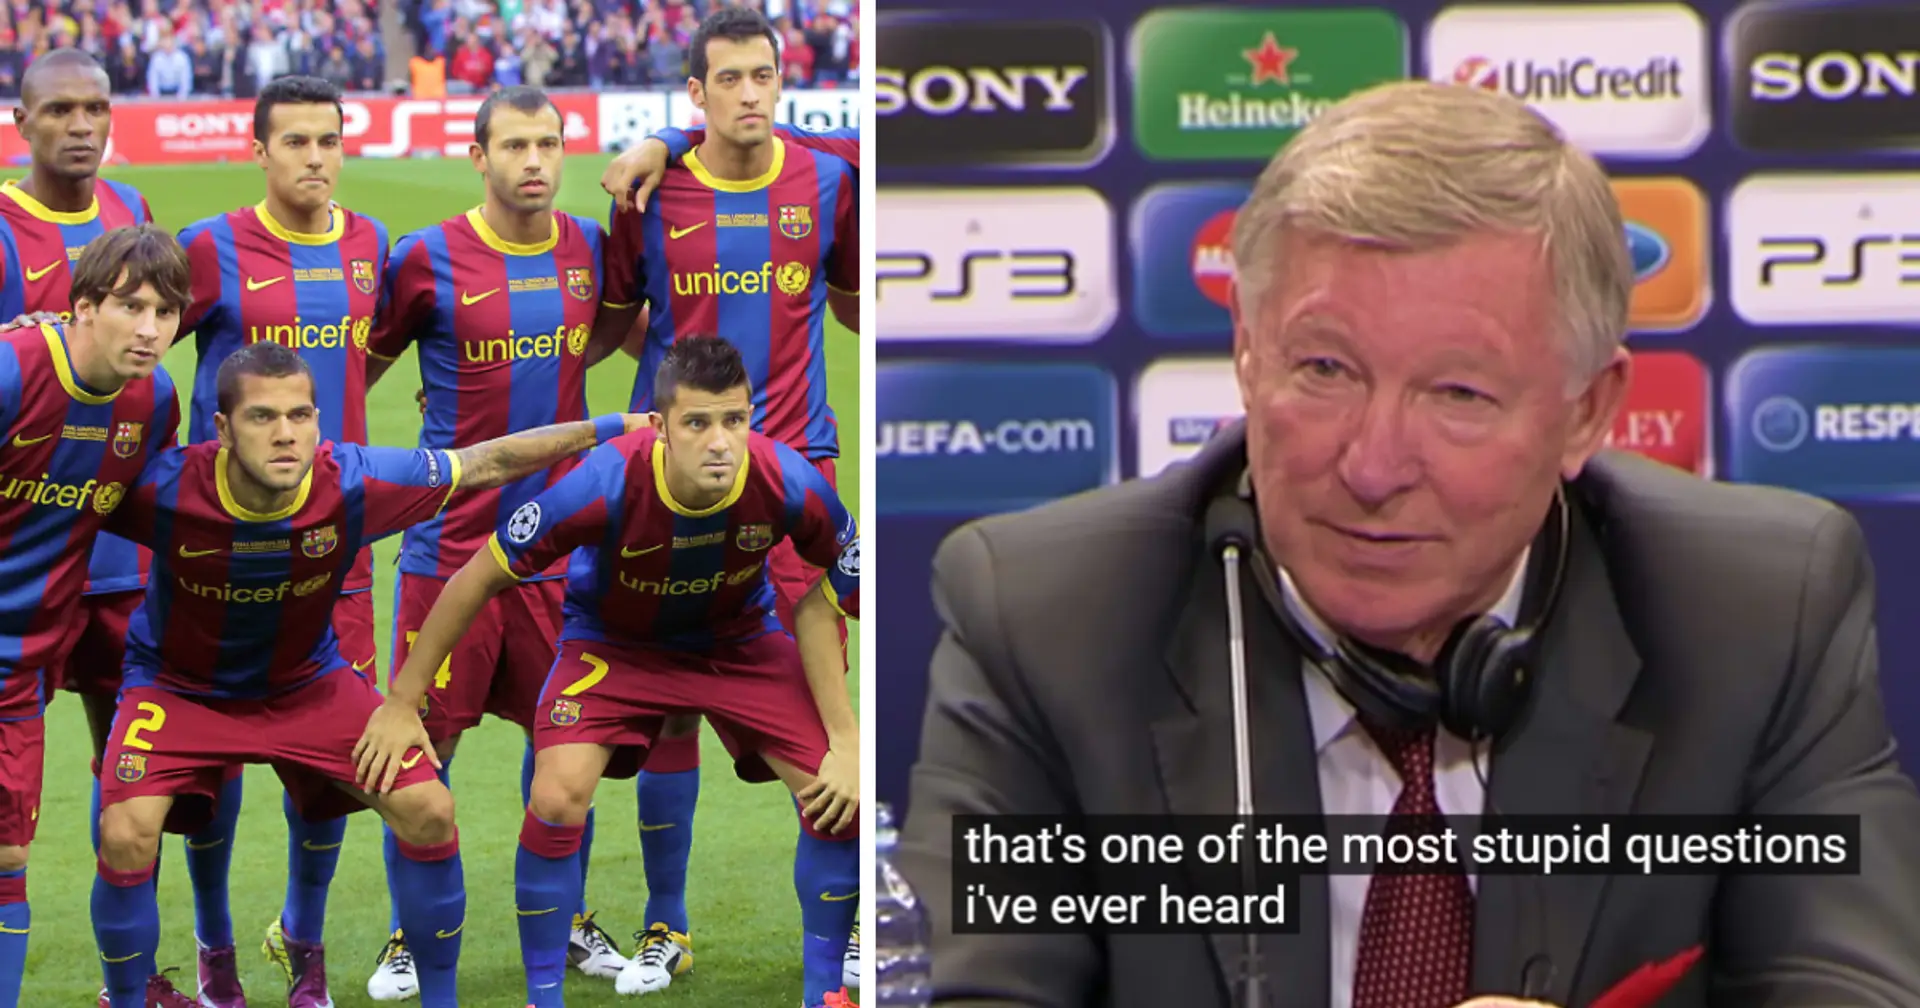 Recalling one Barca player Sir Alex said he'd sign for United - not one of Messi, Xavi or Iniesta